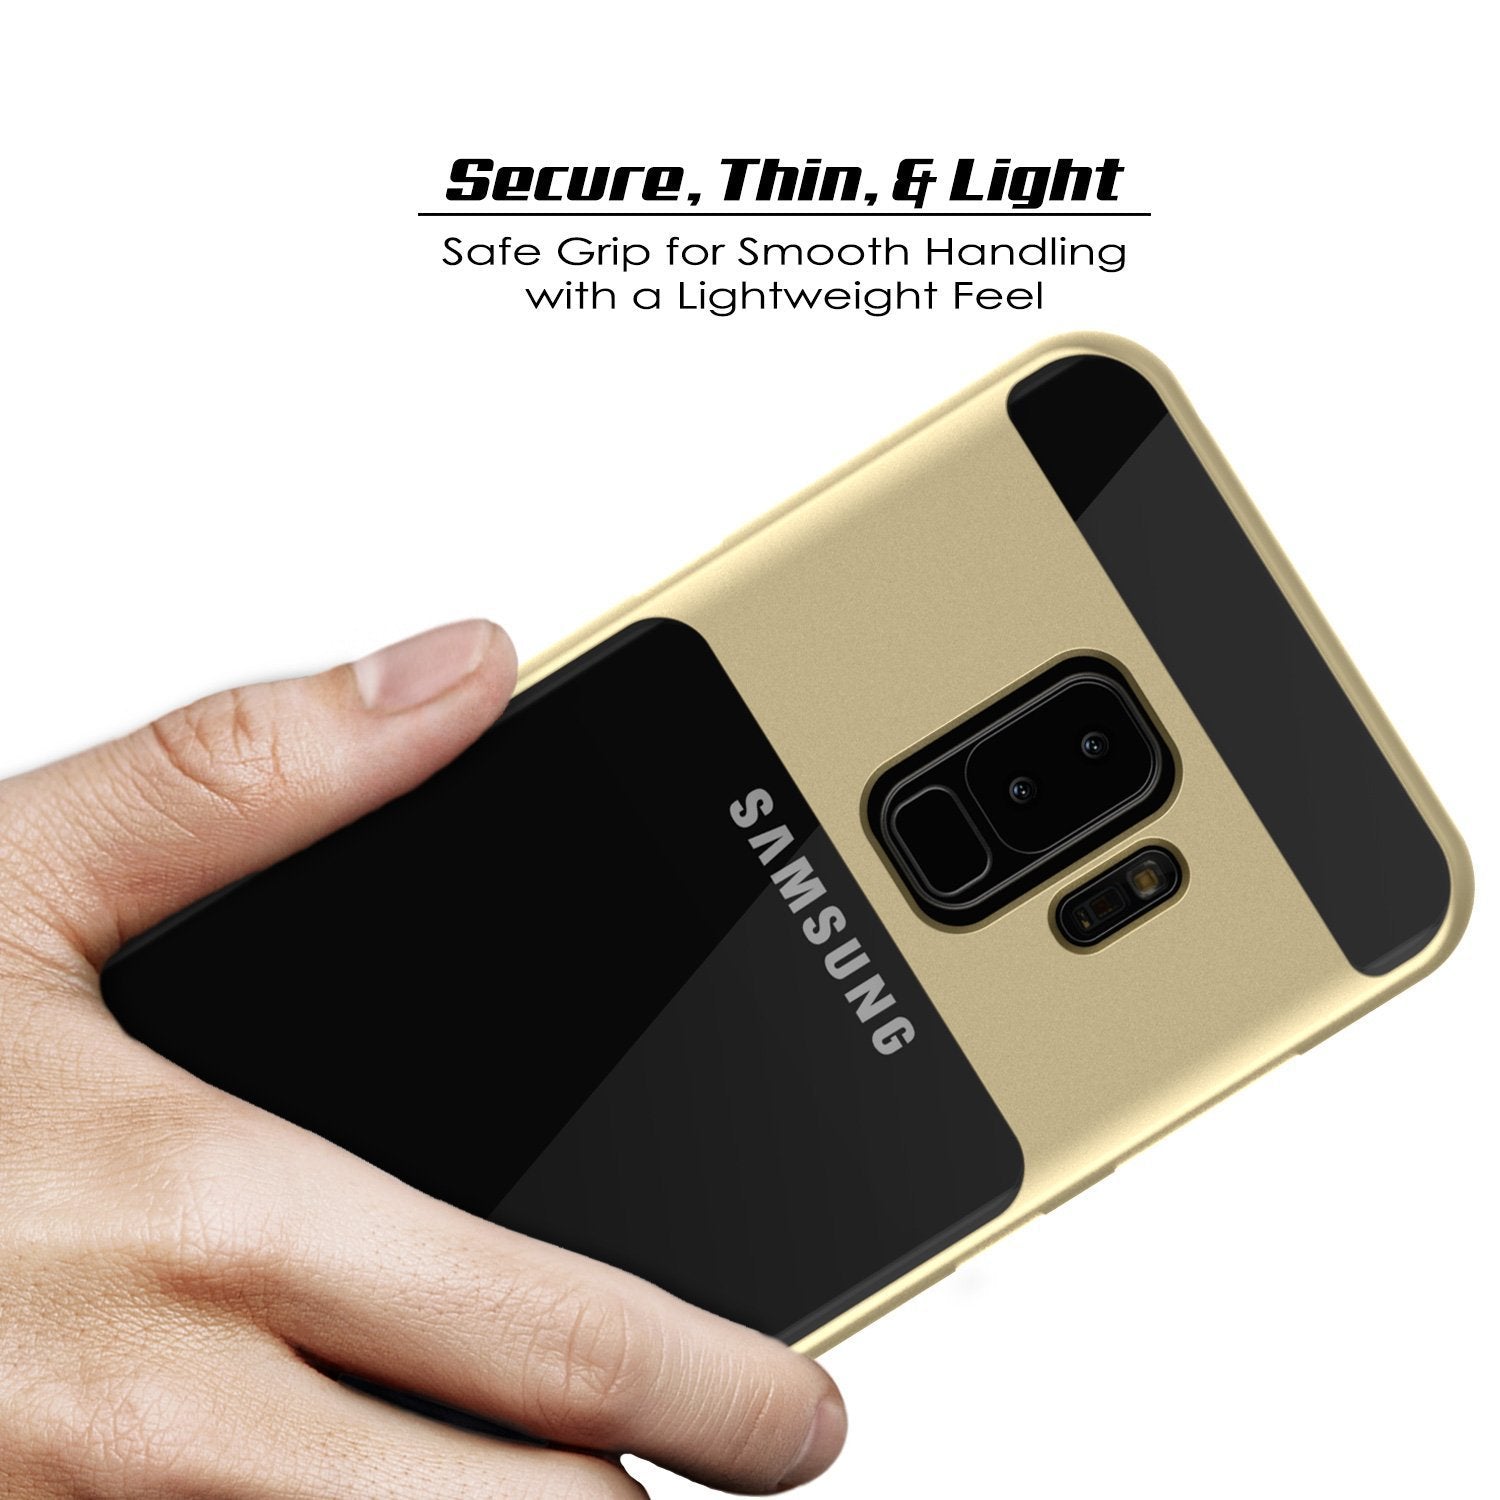 Galaxy S9+ Plus Case, PUNKcase [LUCID 3.0 Series] [Slim Fit] [Clear Back] Armor Cover w/ Integrated Kickstand, Anti-Shock System & PUNKSHIELD Screen Protector for Samsung Galaxy S9+ Plus [Gold]